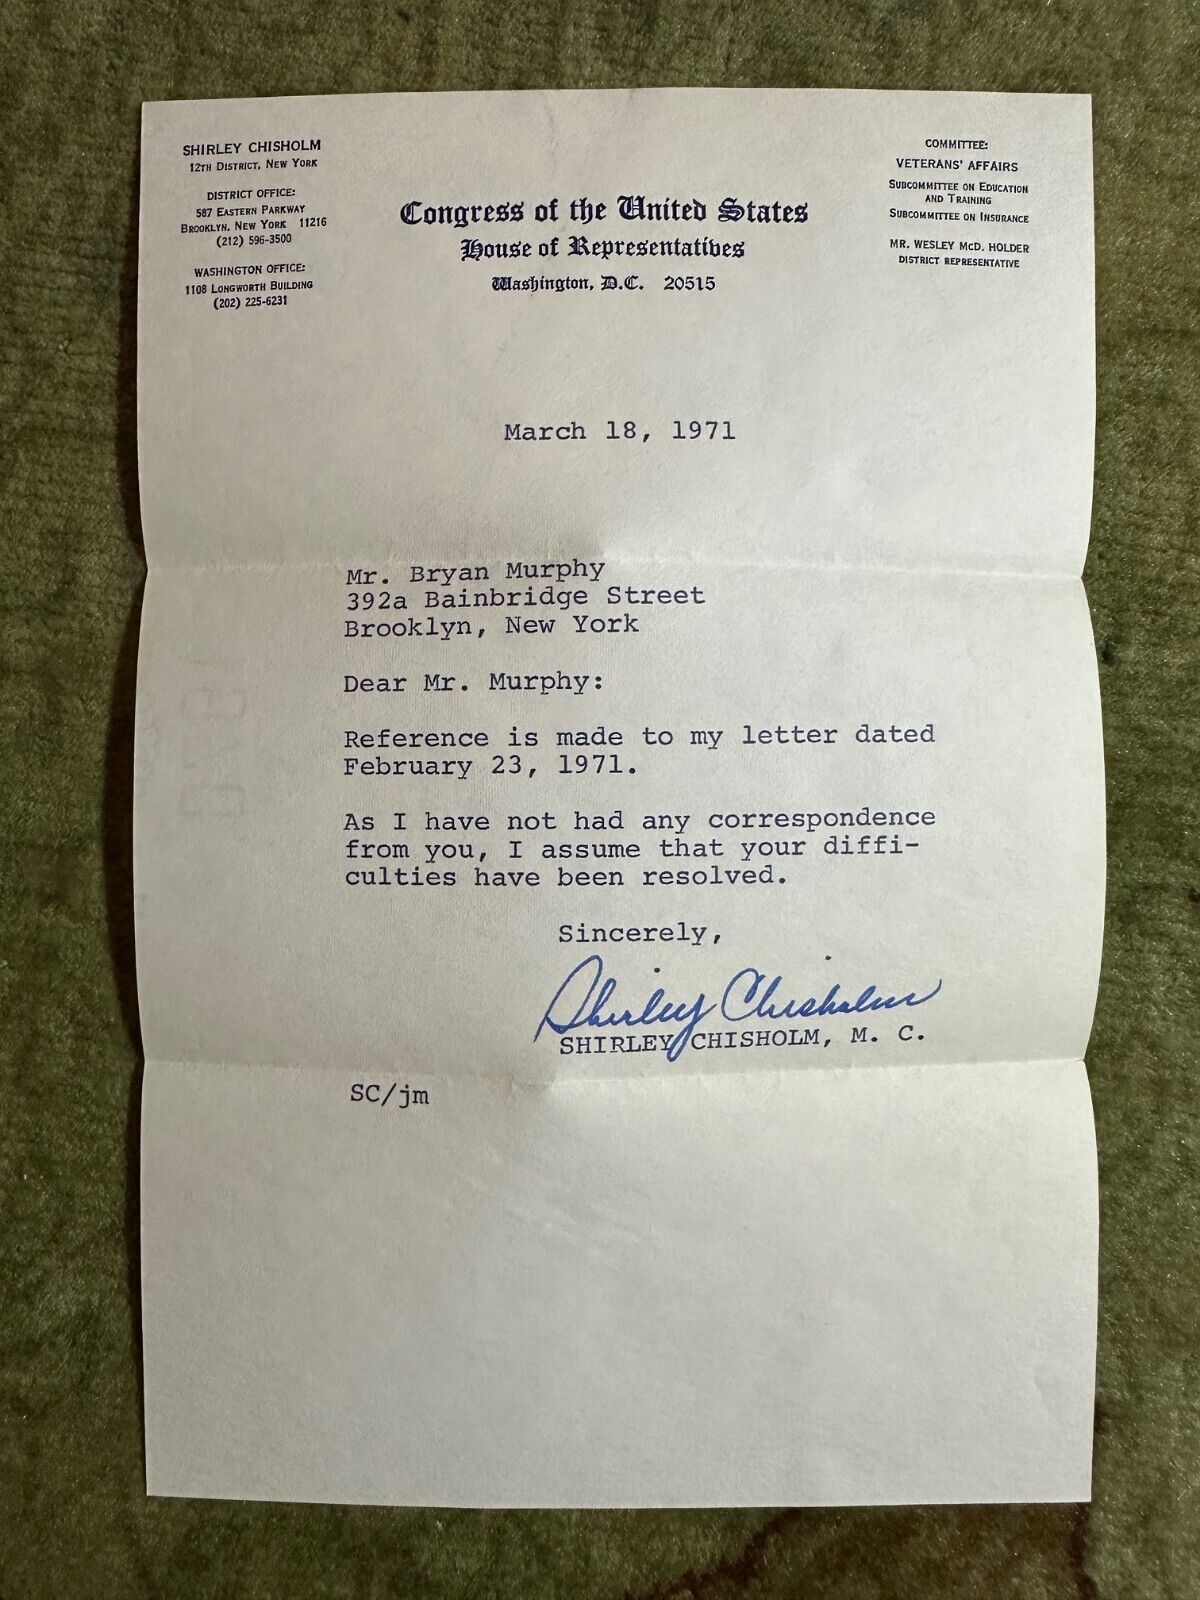 SHIRLEY CHISHOLM Autographed / Signed Letter on Congressional Letterhead